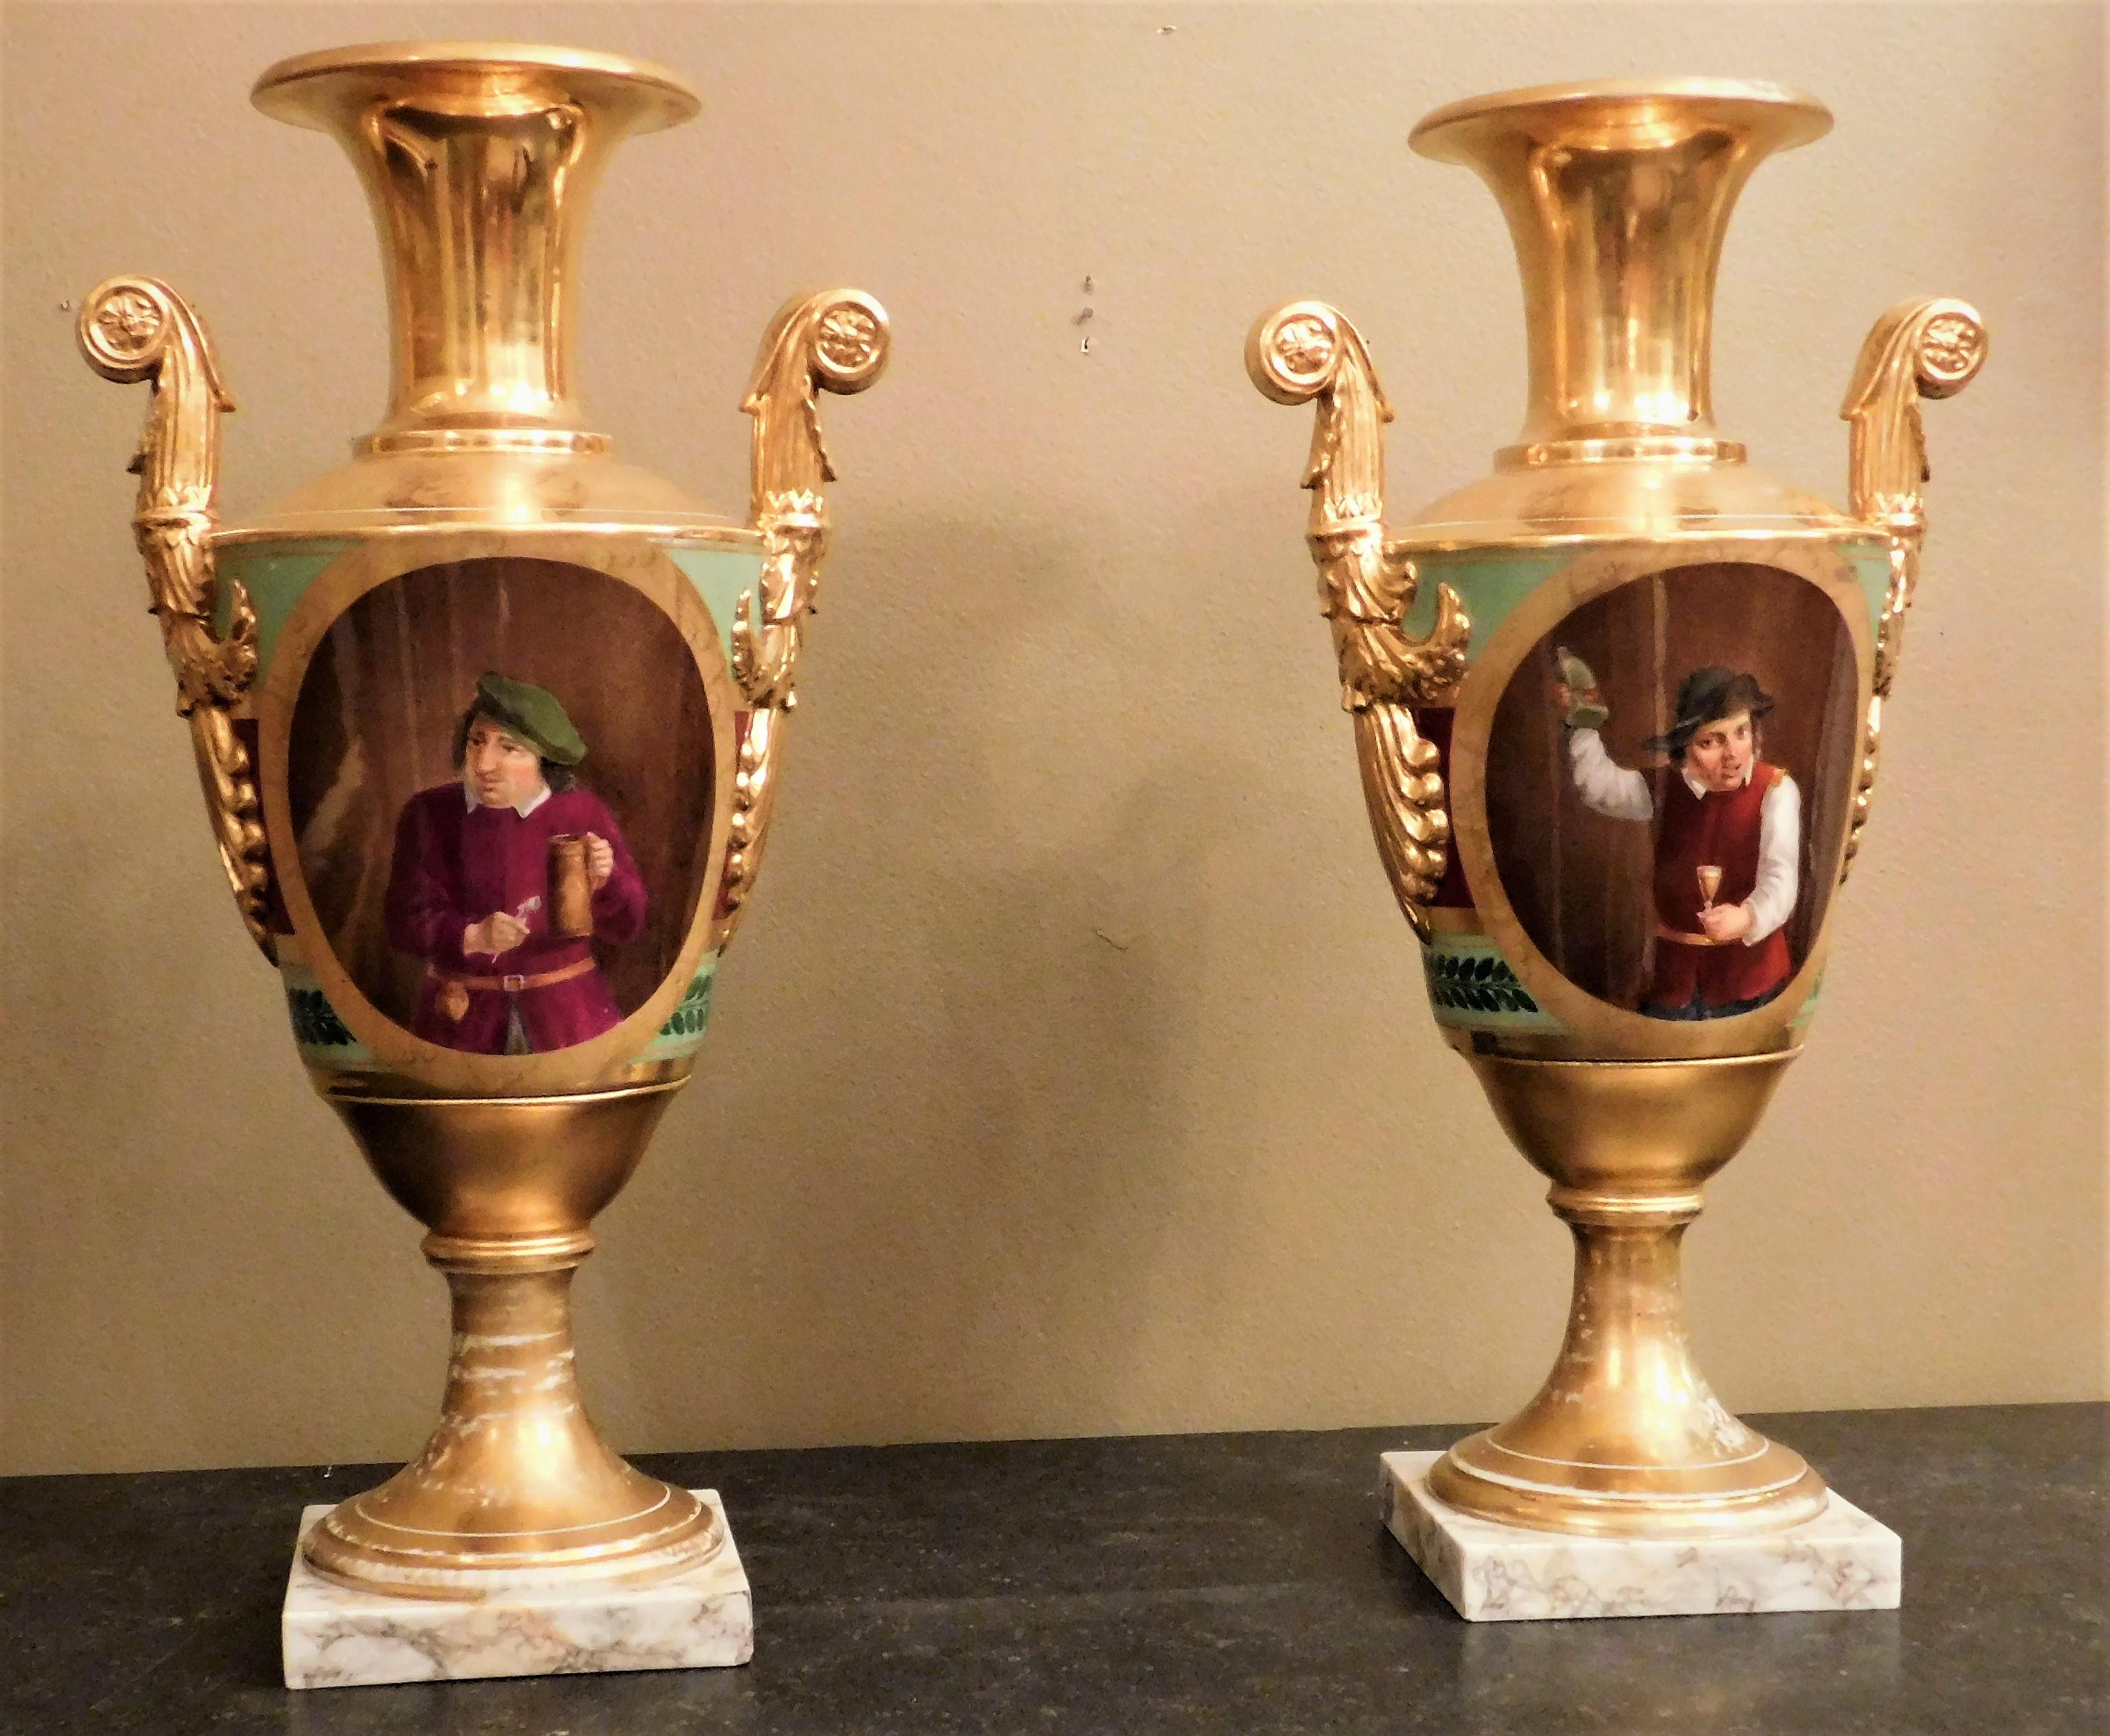 This pair of neoclassic Vieux Paris conical shaped vases have Classical Roman motifs on one side. Portraits on the other side depict an inebriate on one vase and a teetotaler on the other vase. Gilt contrast burnished gold decoration and poly chrome